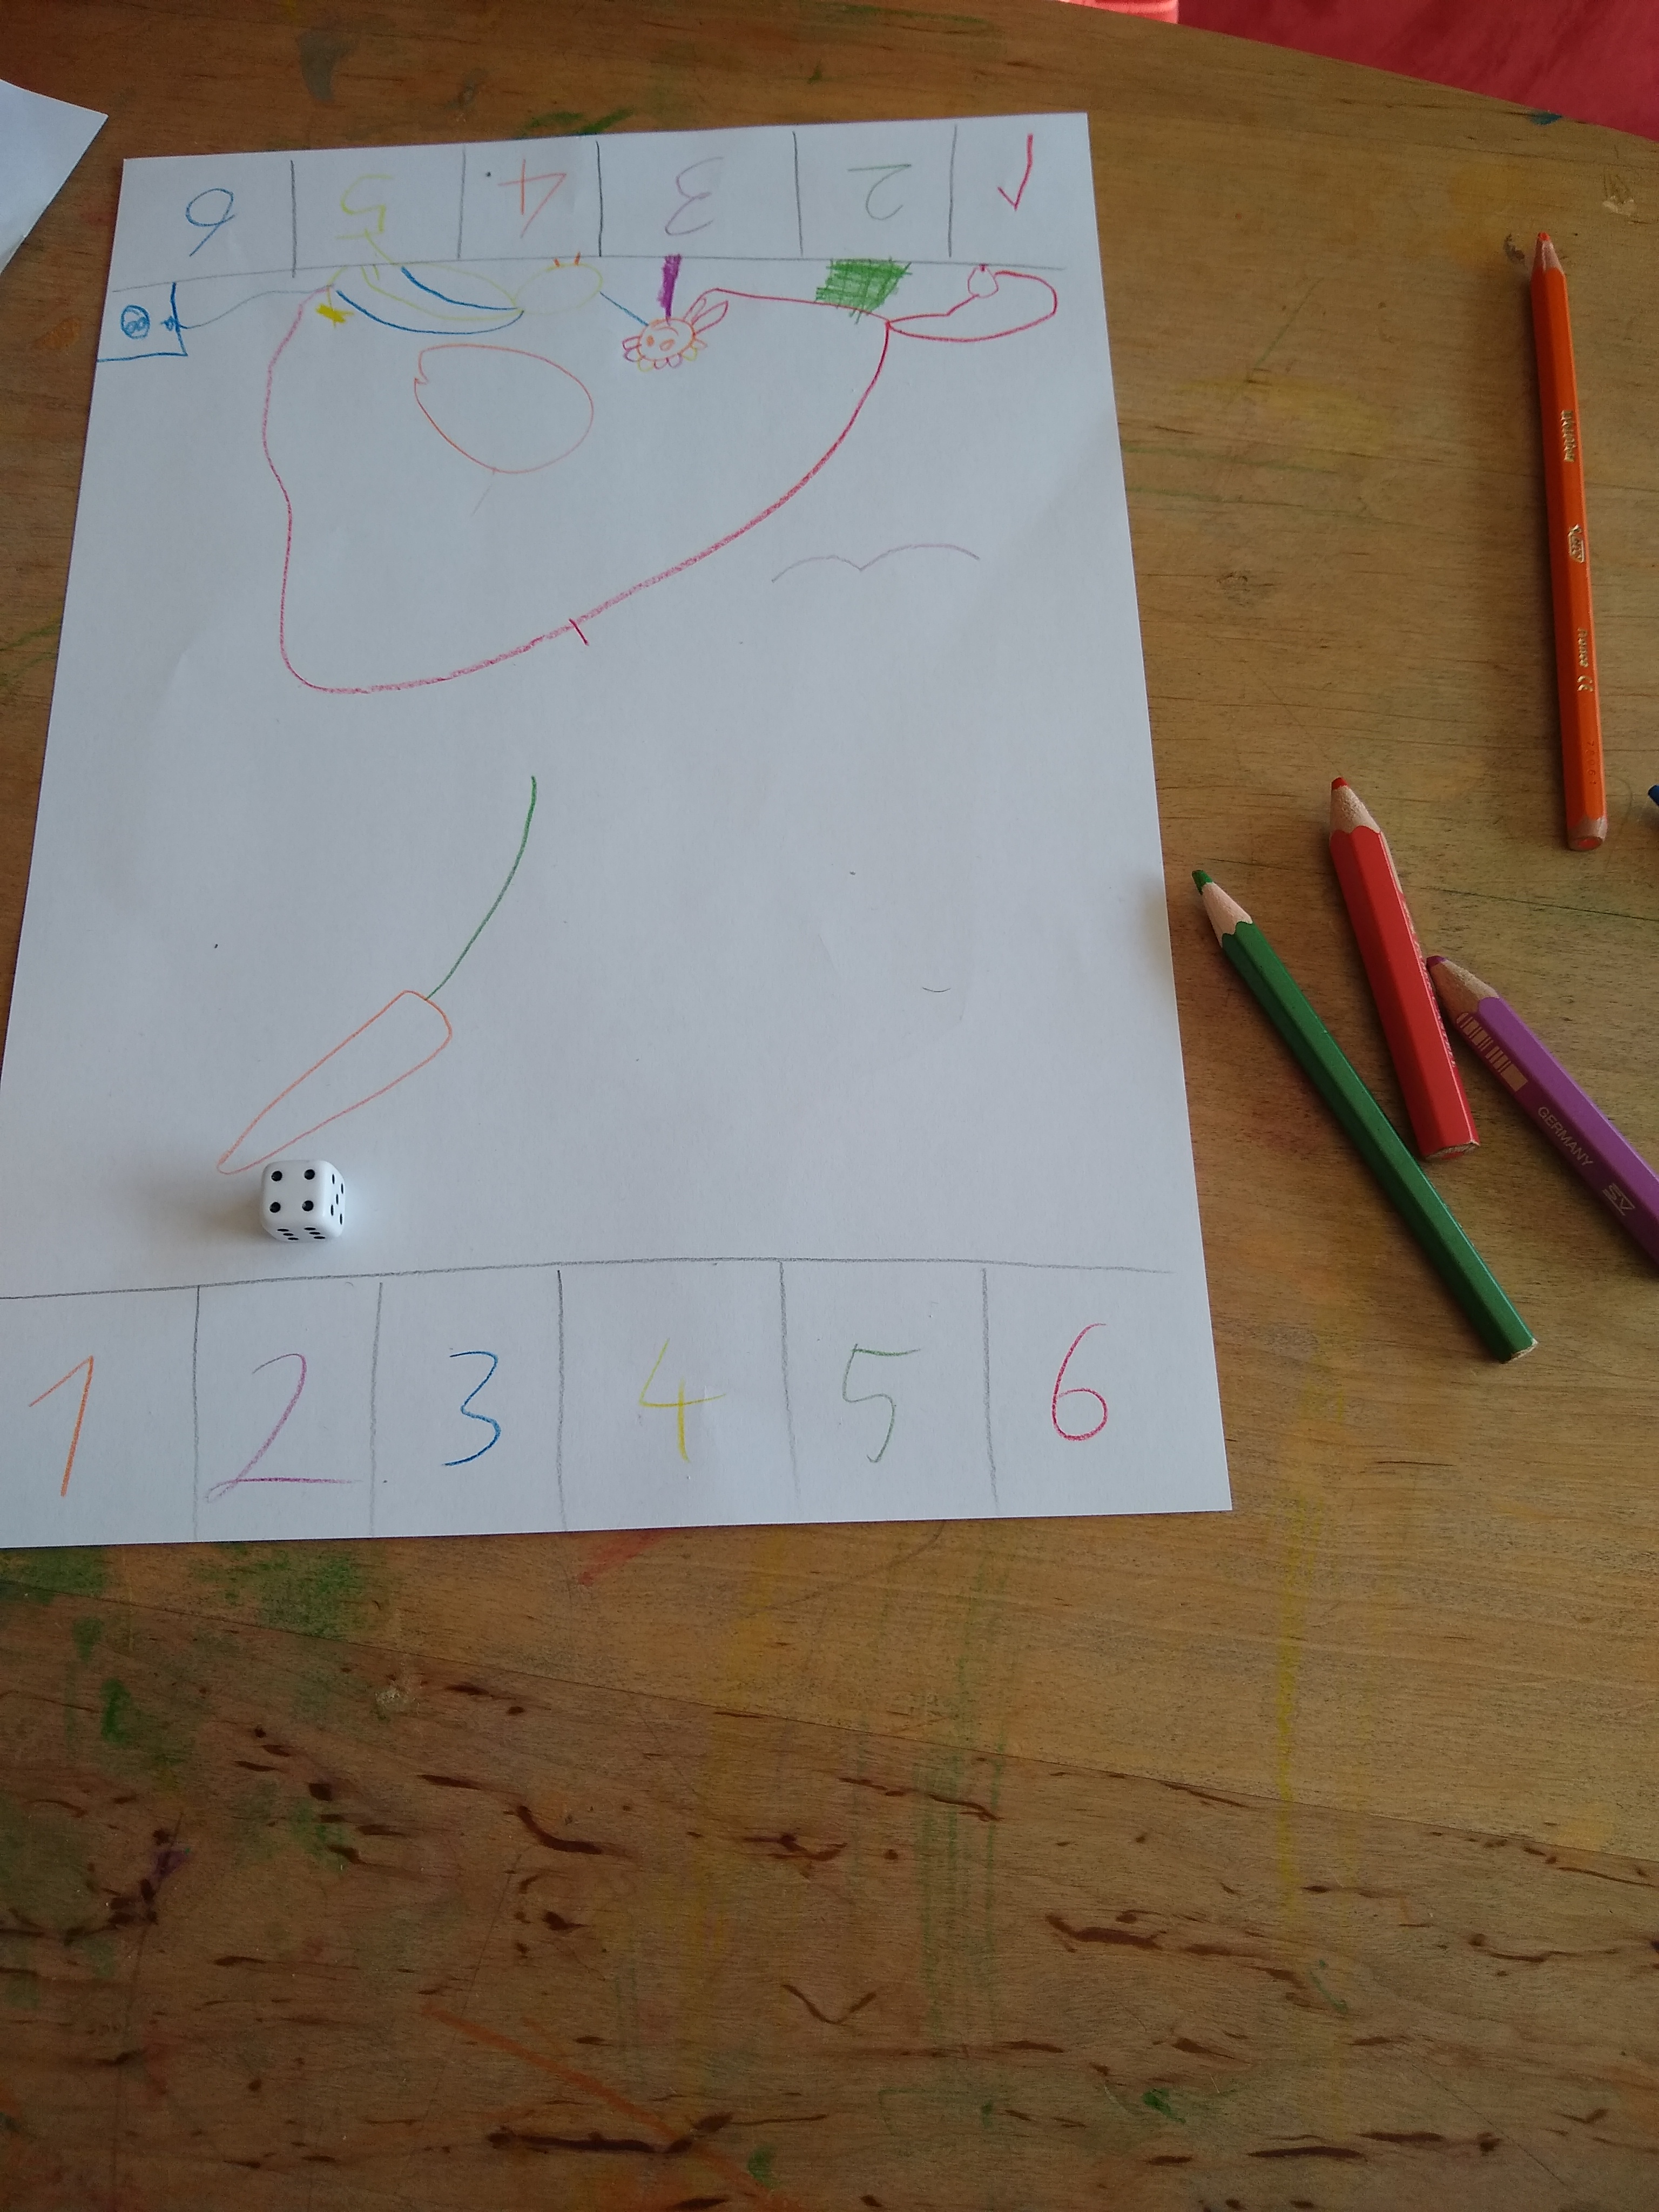 One page lying on a wooden table with numerals 1 to 6 drawn in six different
colors on each short side and, in the middle of the page, various drawings
consisting of strokes in one of the six colors. On the page lies a six sided
dice. Next to the page, three colored pencils are
visible.